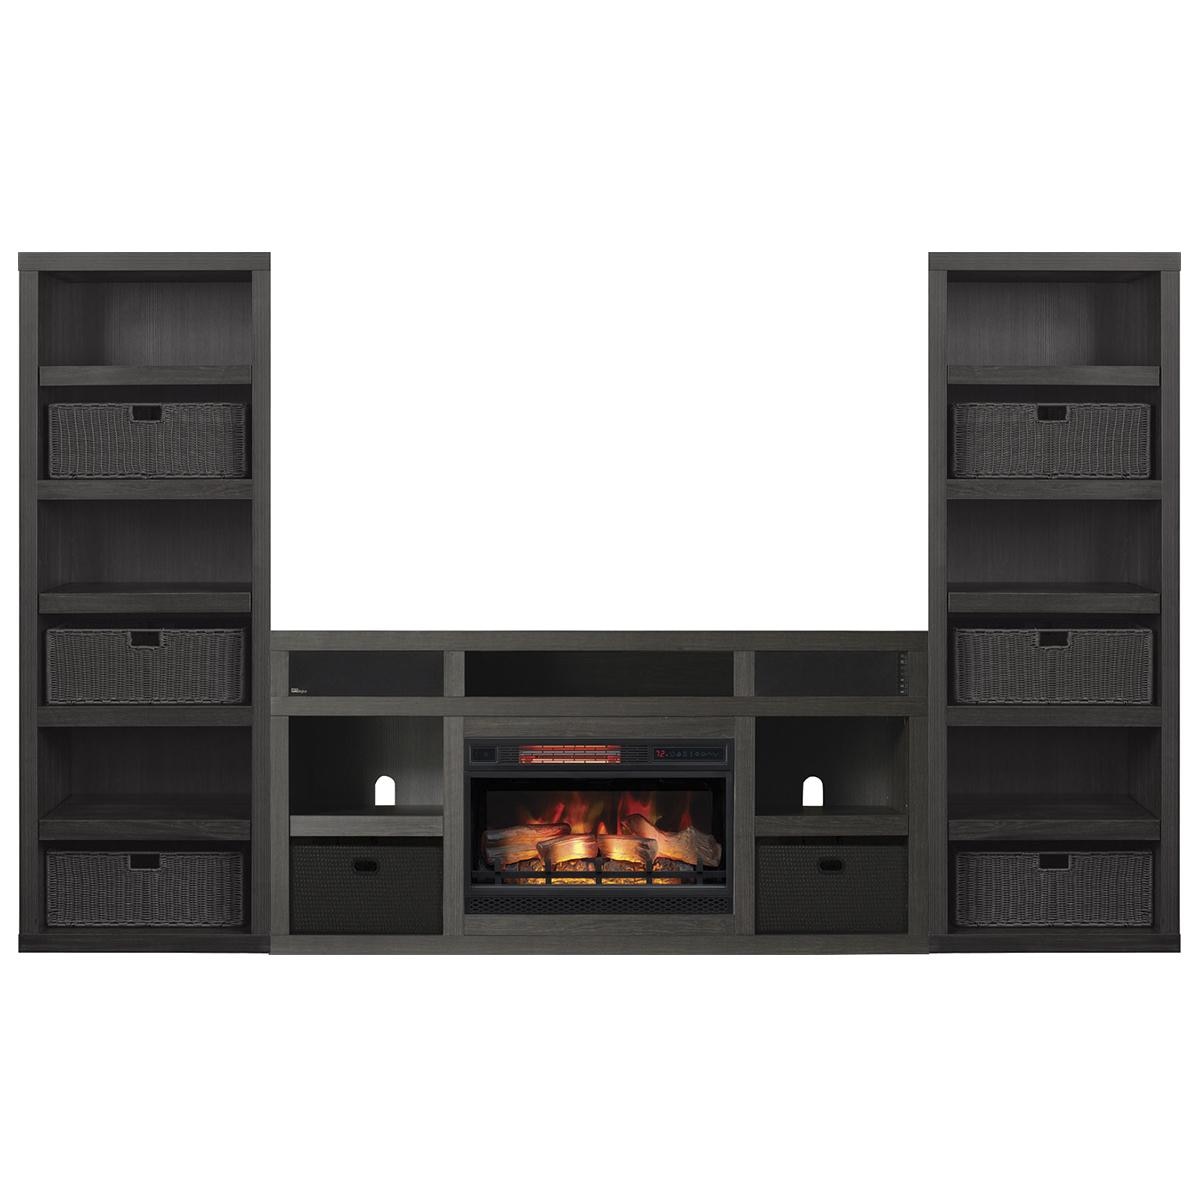 Fireplace thermostat Unique Fabio Flames Greatlin 3 Piece Fireplace Entertainment Wall